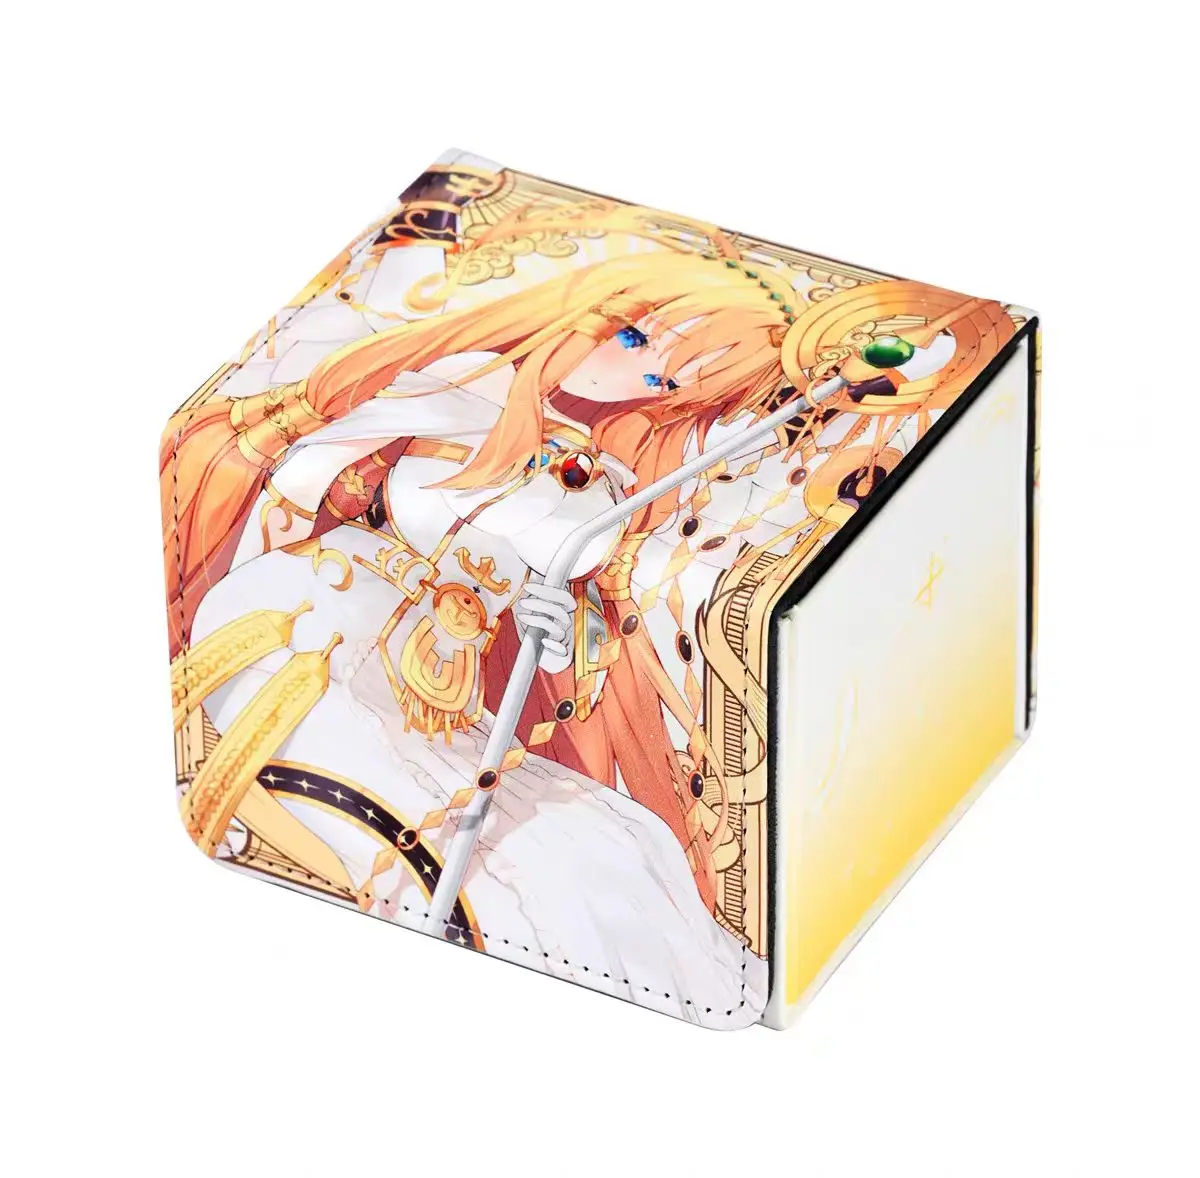 100+ PU Anime Cards Storage Box Deck Board Game TCG Cards Box Protector Bag for MGT/Pkm/Yu-gi-oh/Trading Card Collecting Game